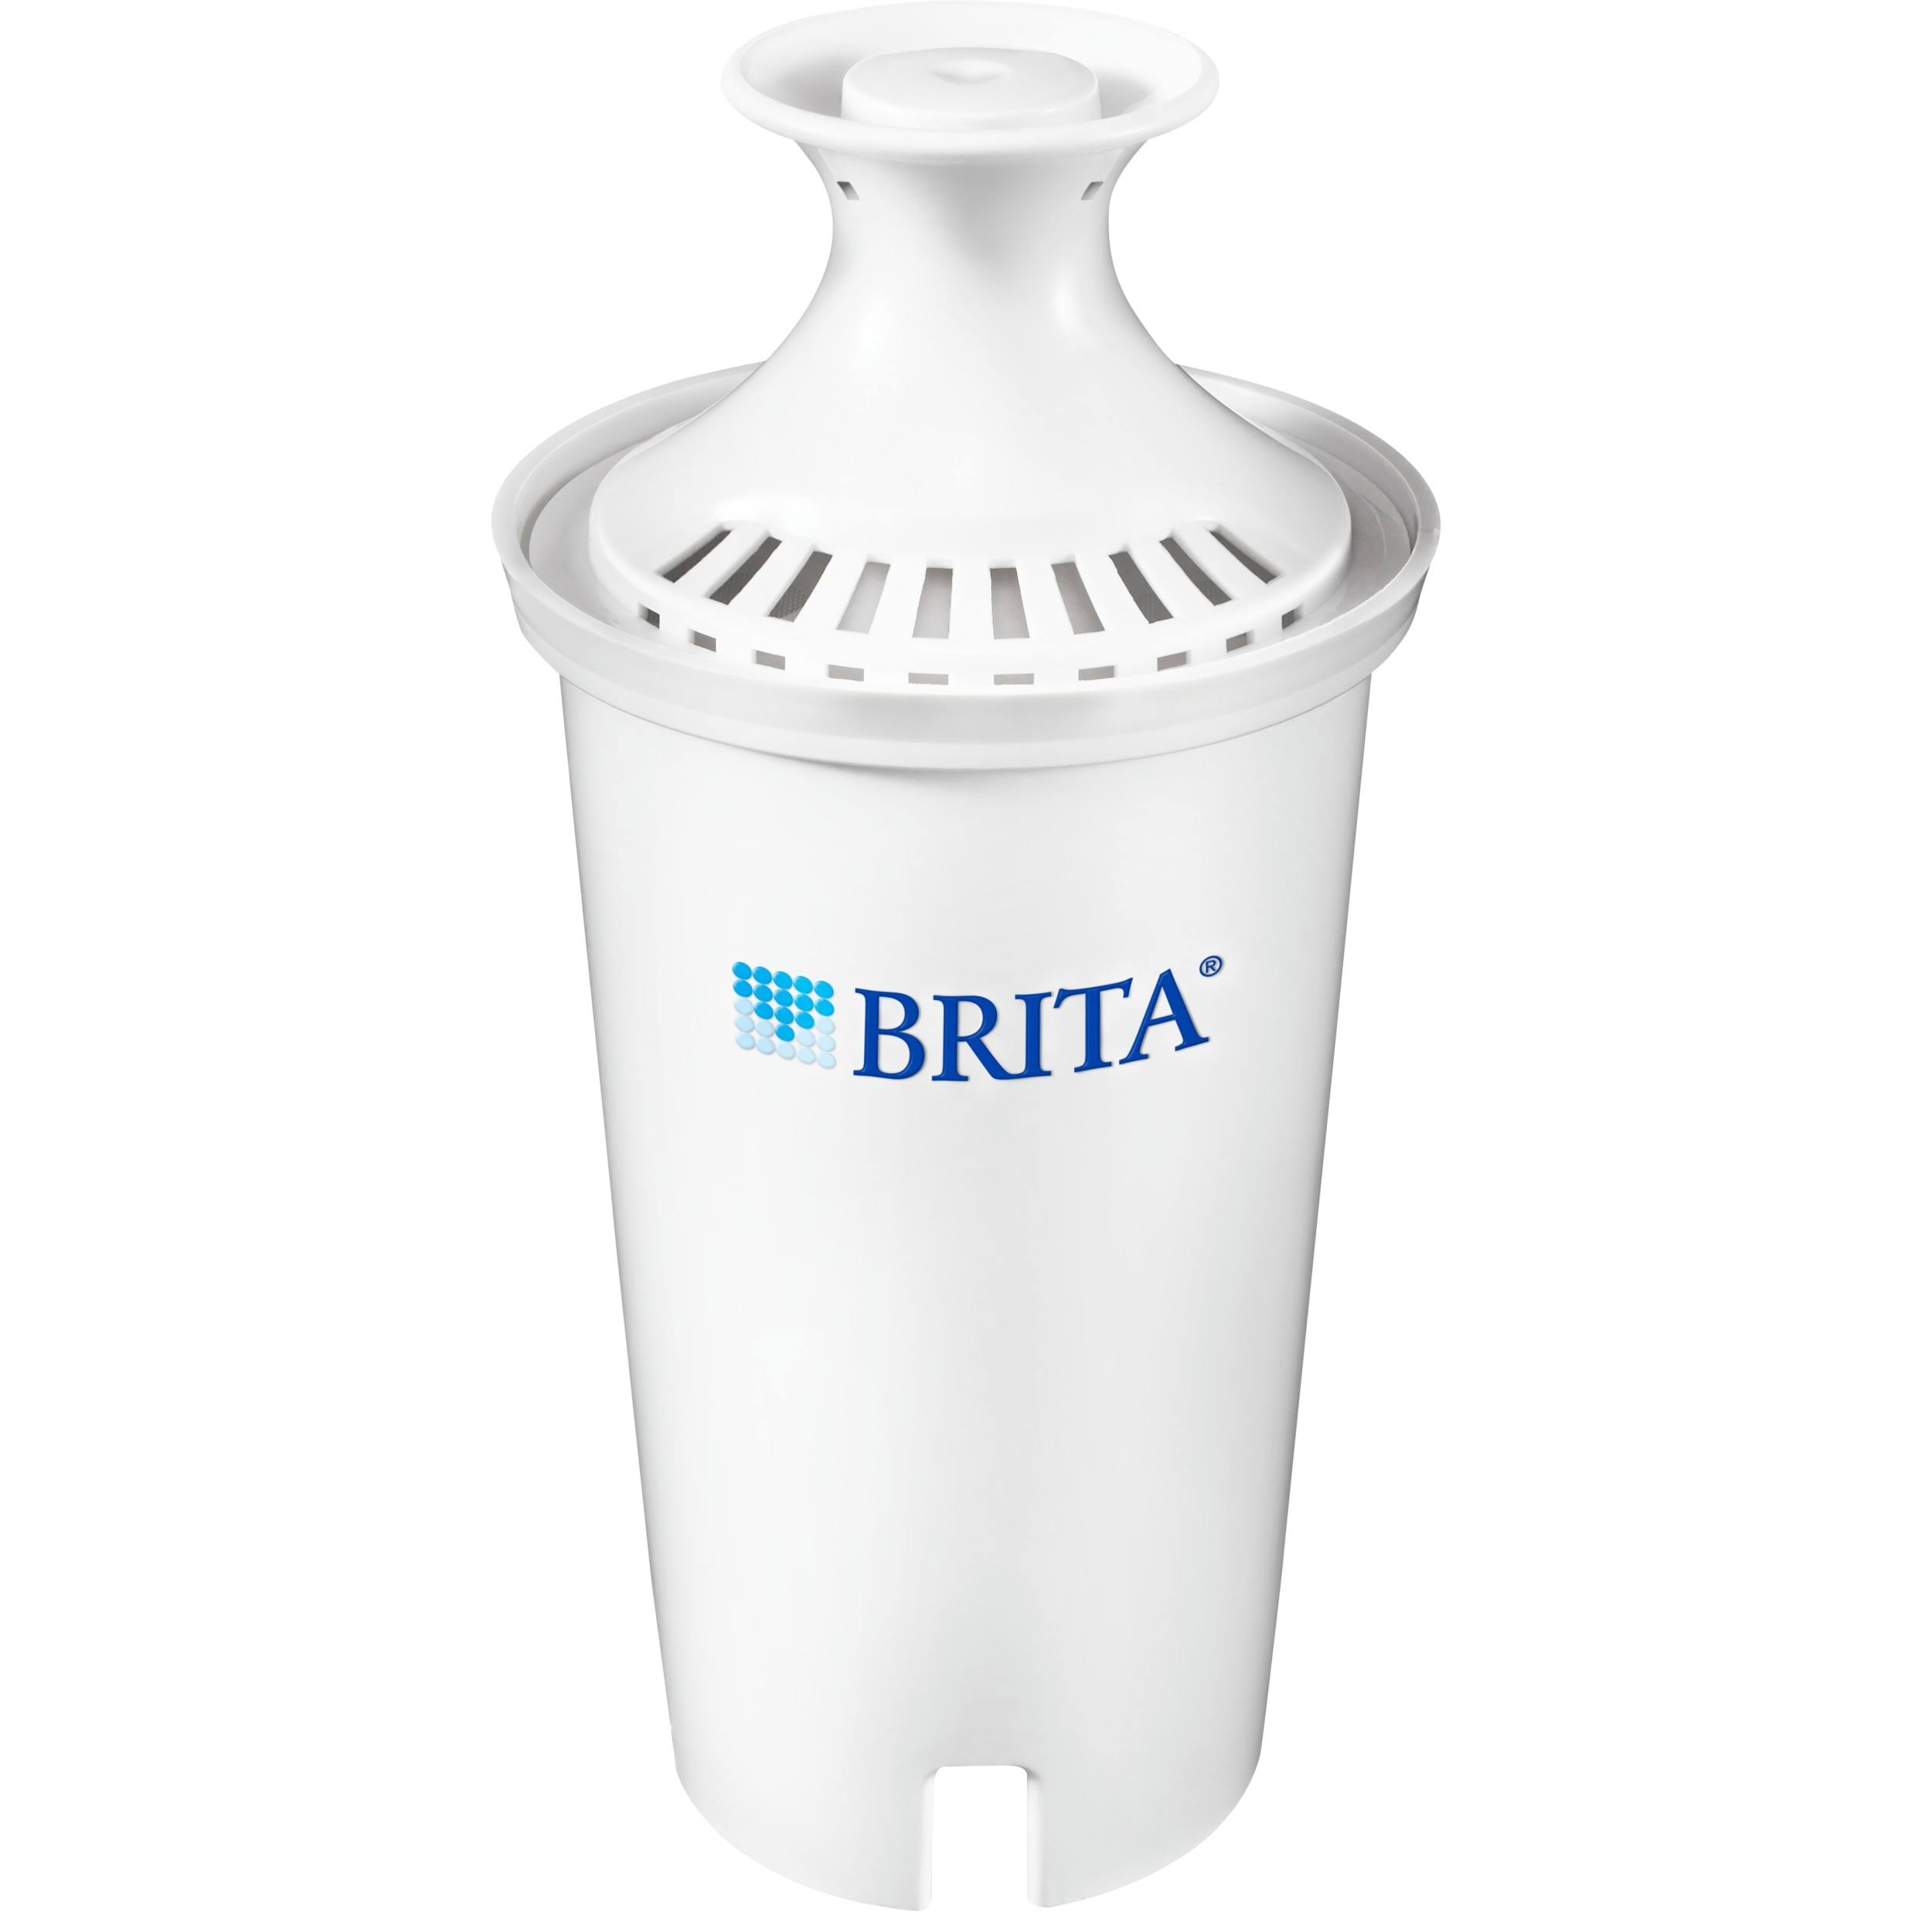 Brita Pitcher Replacement Filter - Single Pack